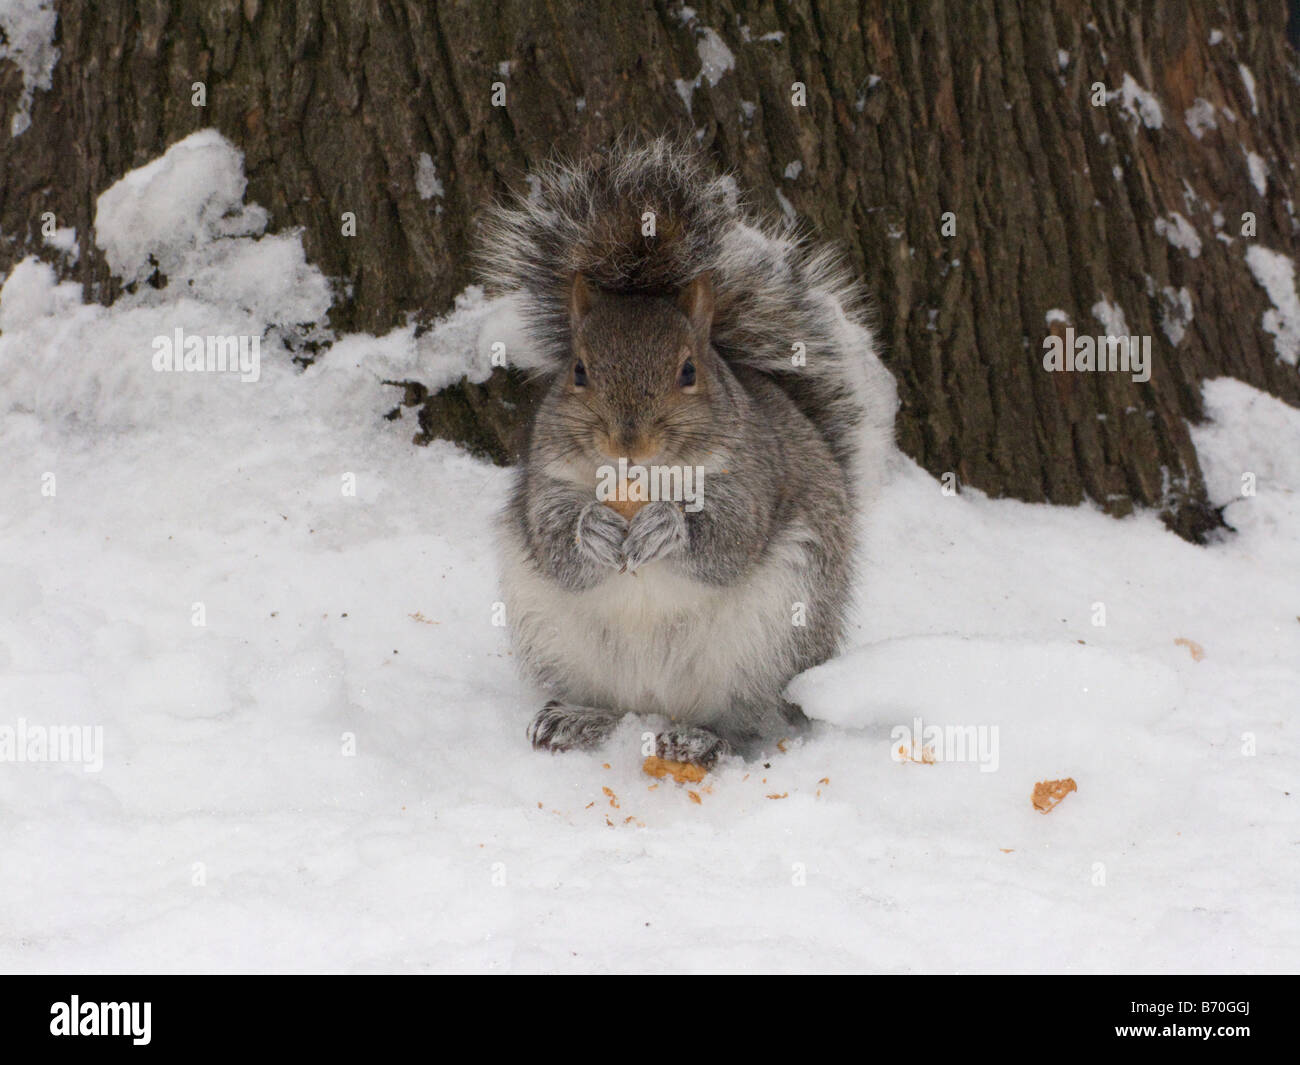 Cute Squirrel eating in the snow, staring right at the camera Stock Photo